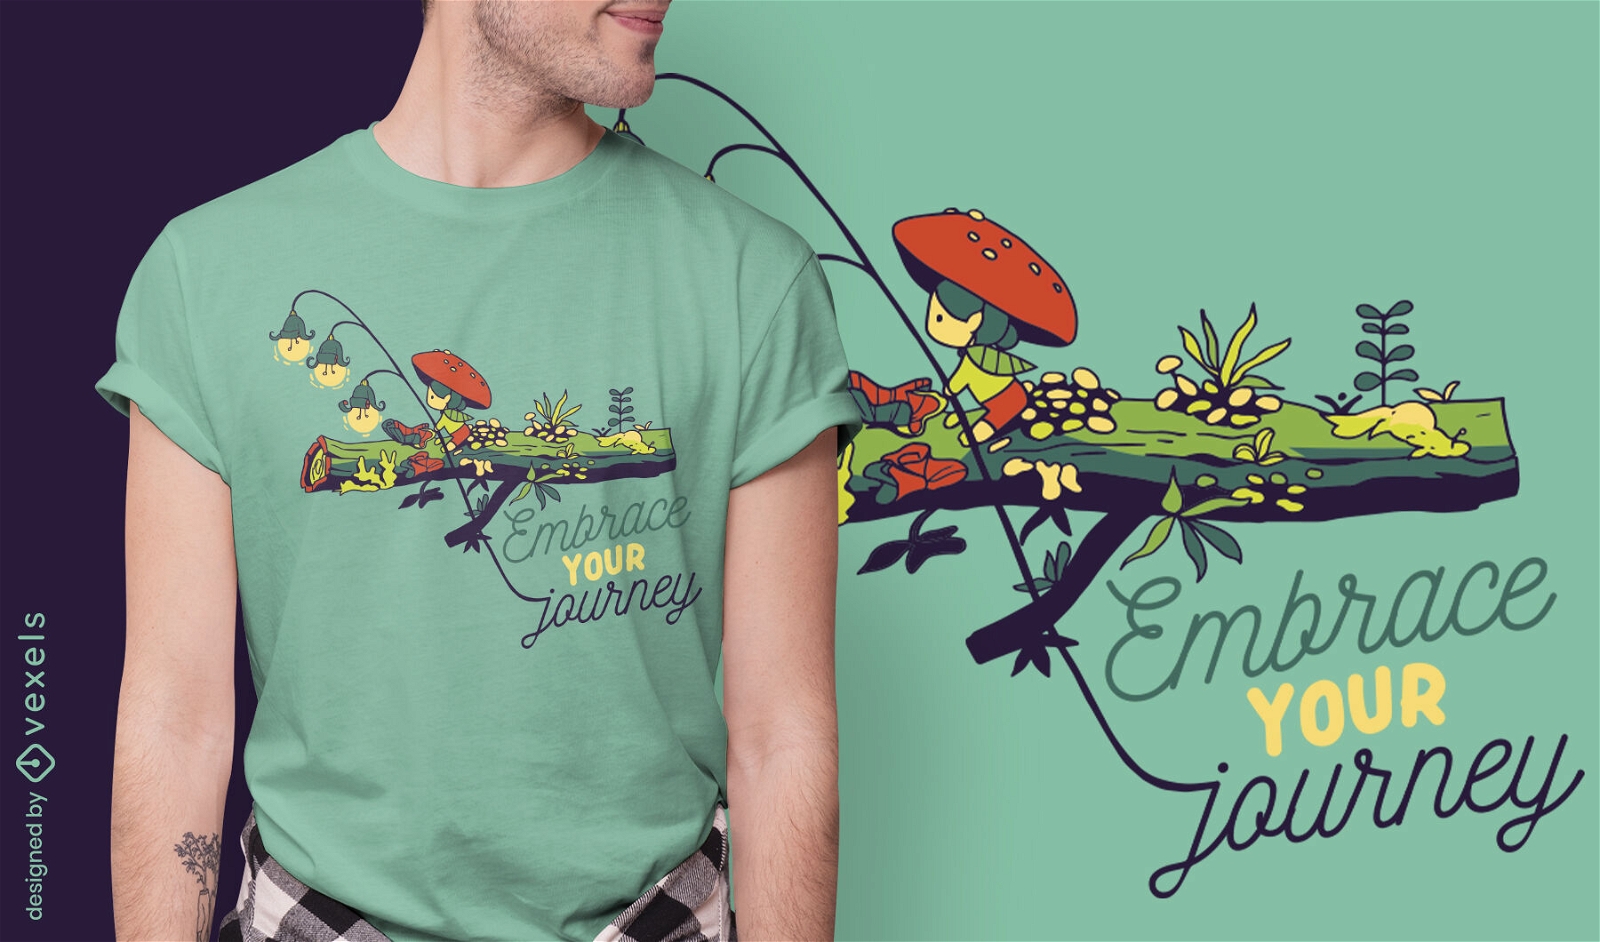 Embrace your journey quote t-shirt design